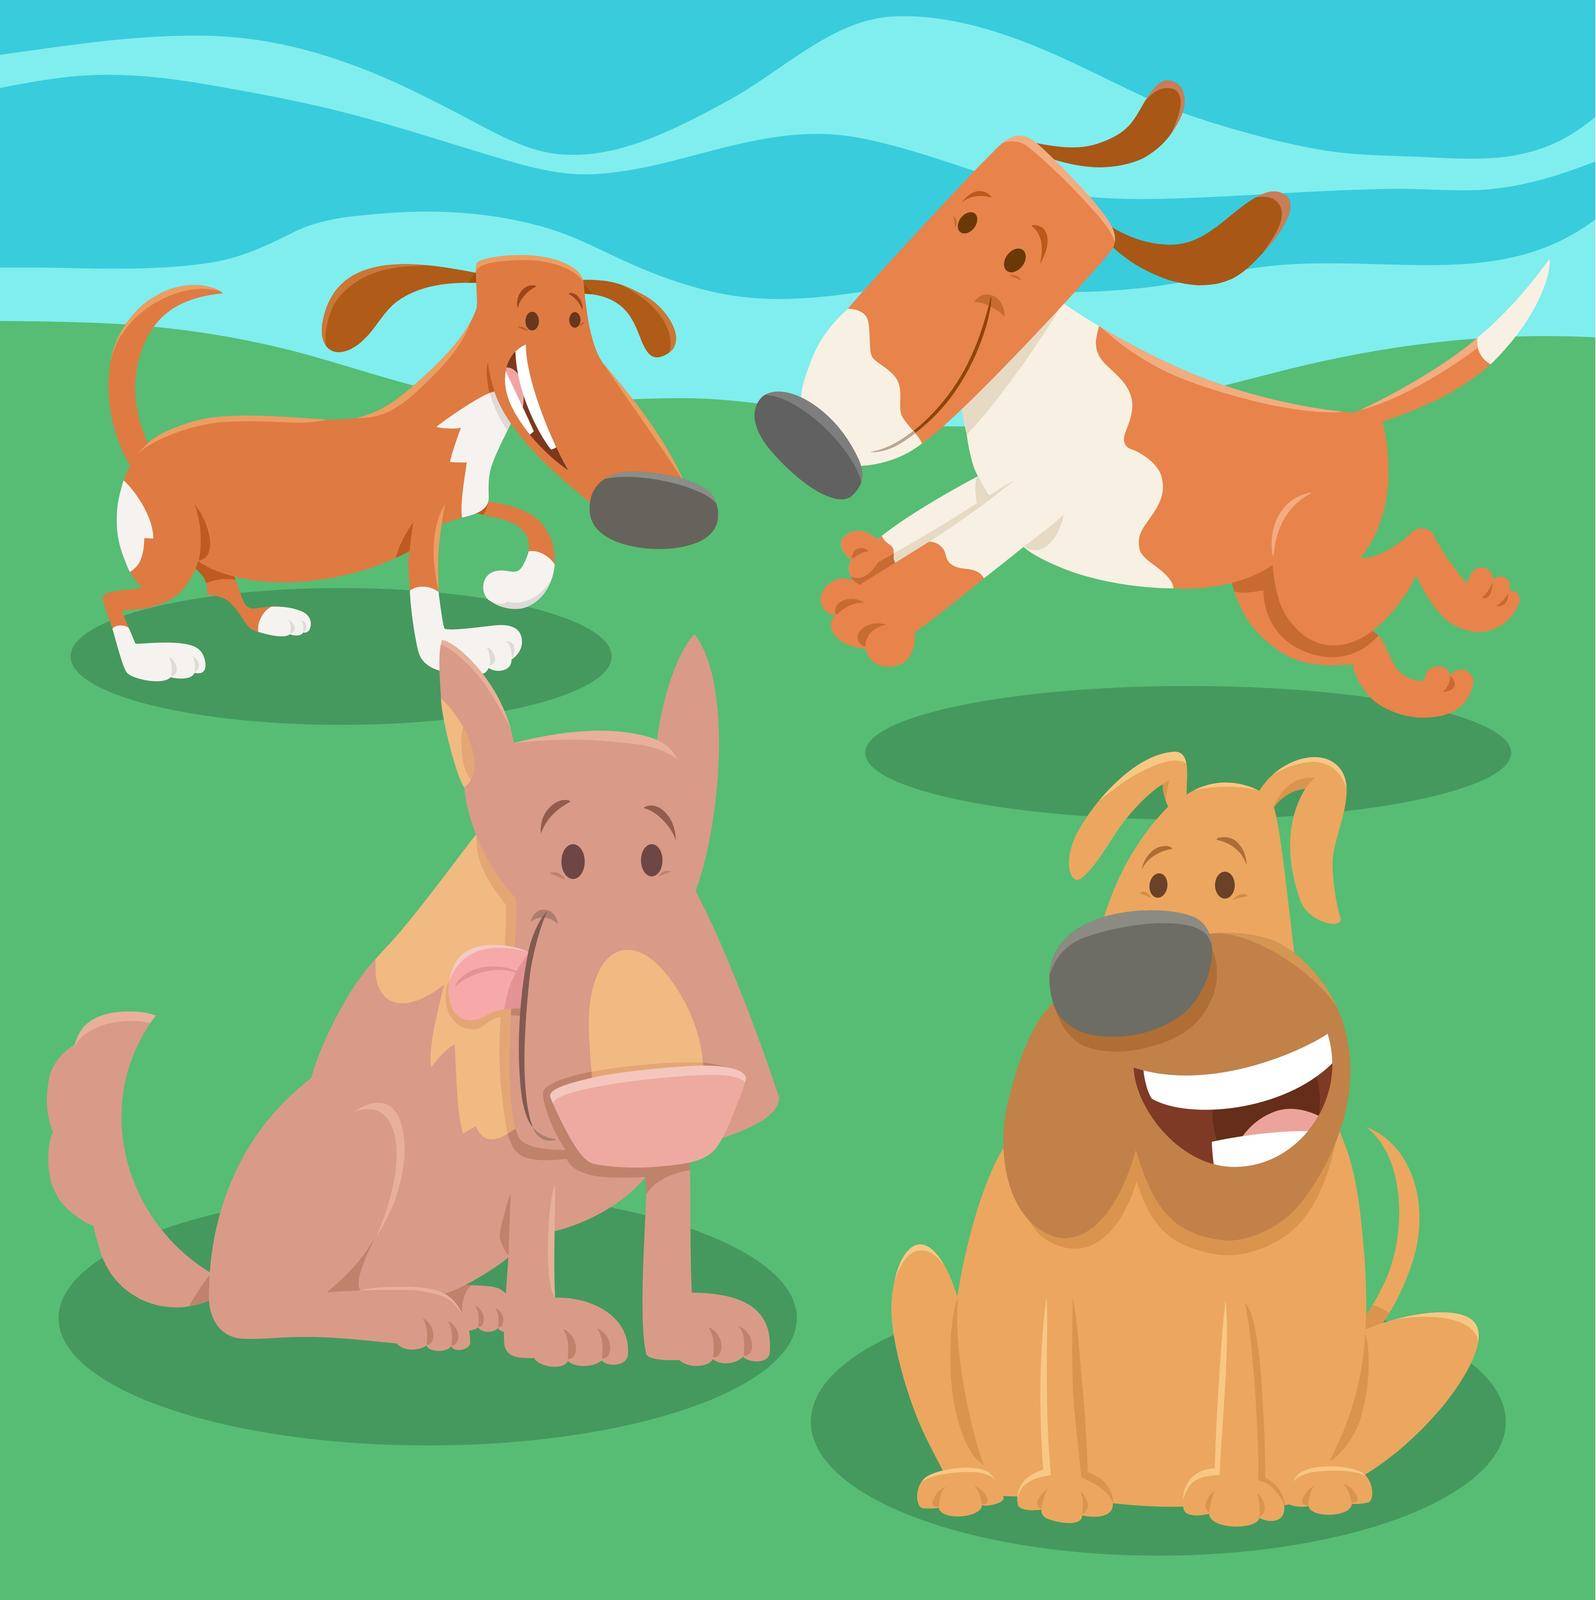 Cartoon illustration of playful dogs animal characters group